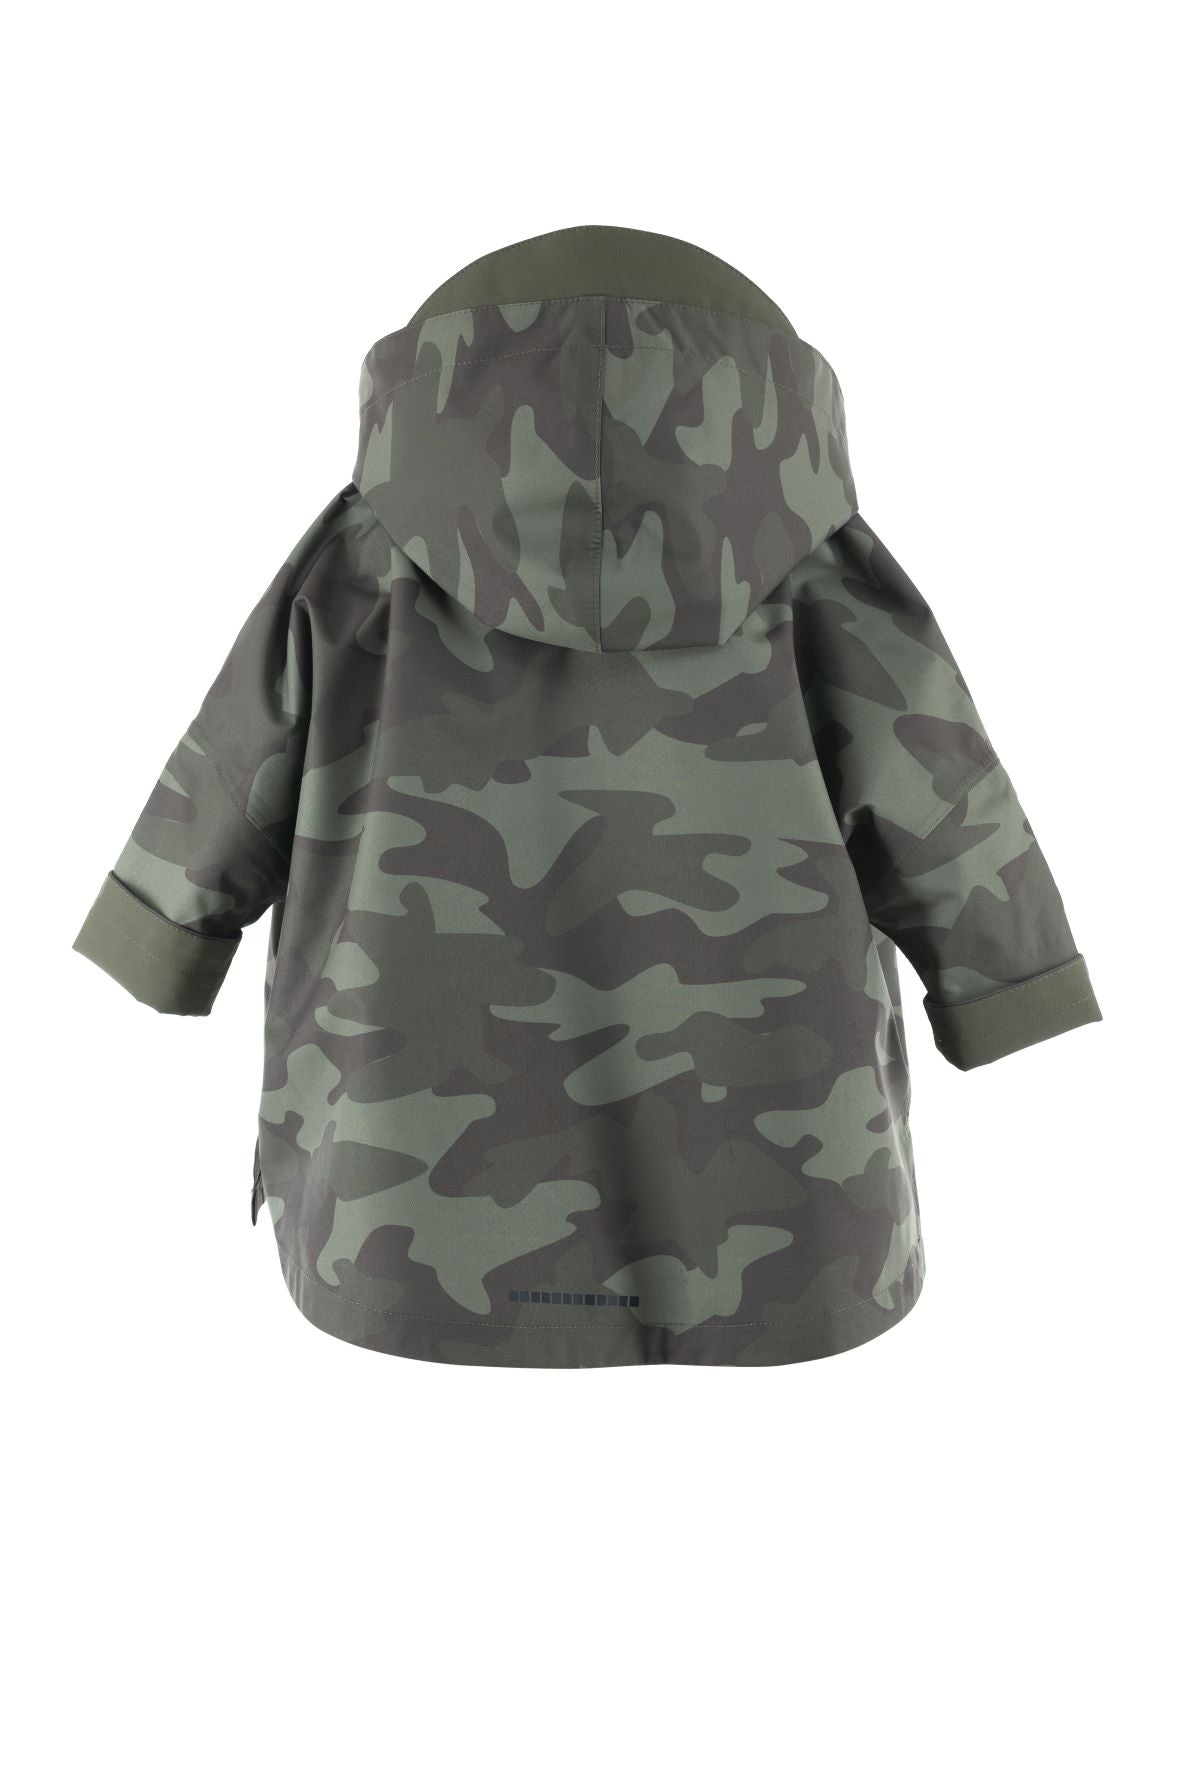 Aalesund Mini poncho Camo from Blæst